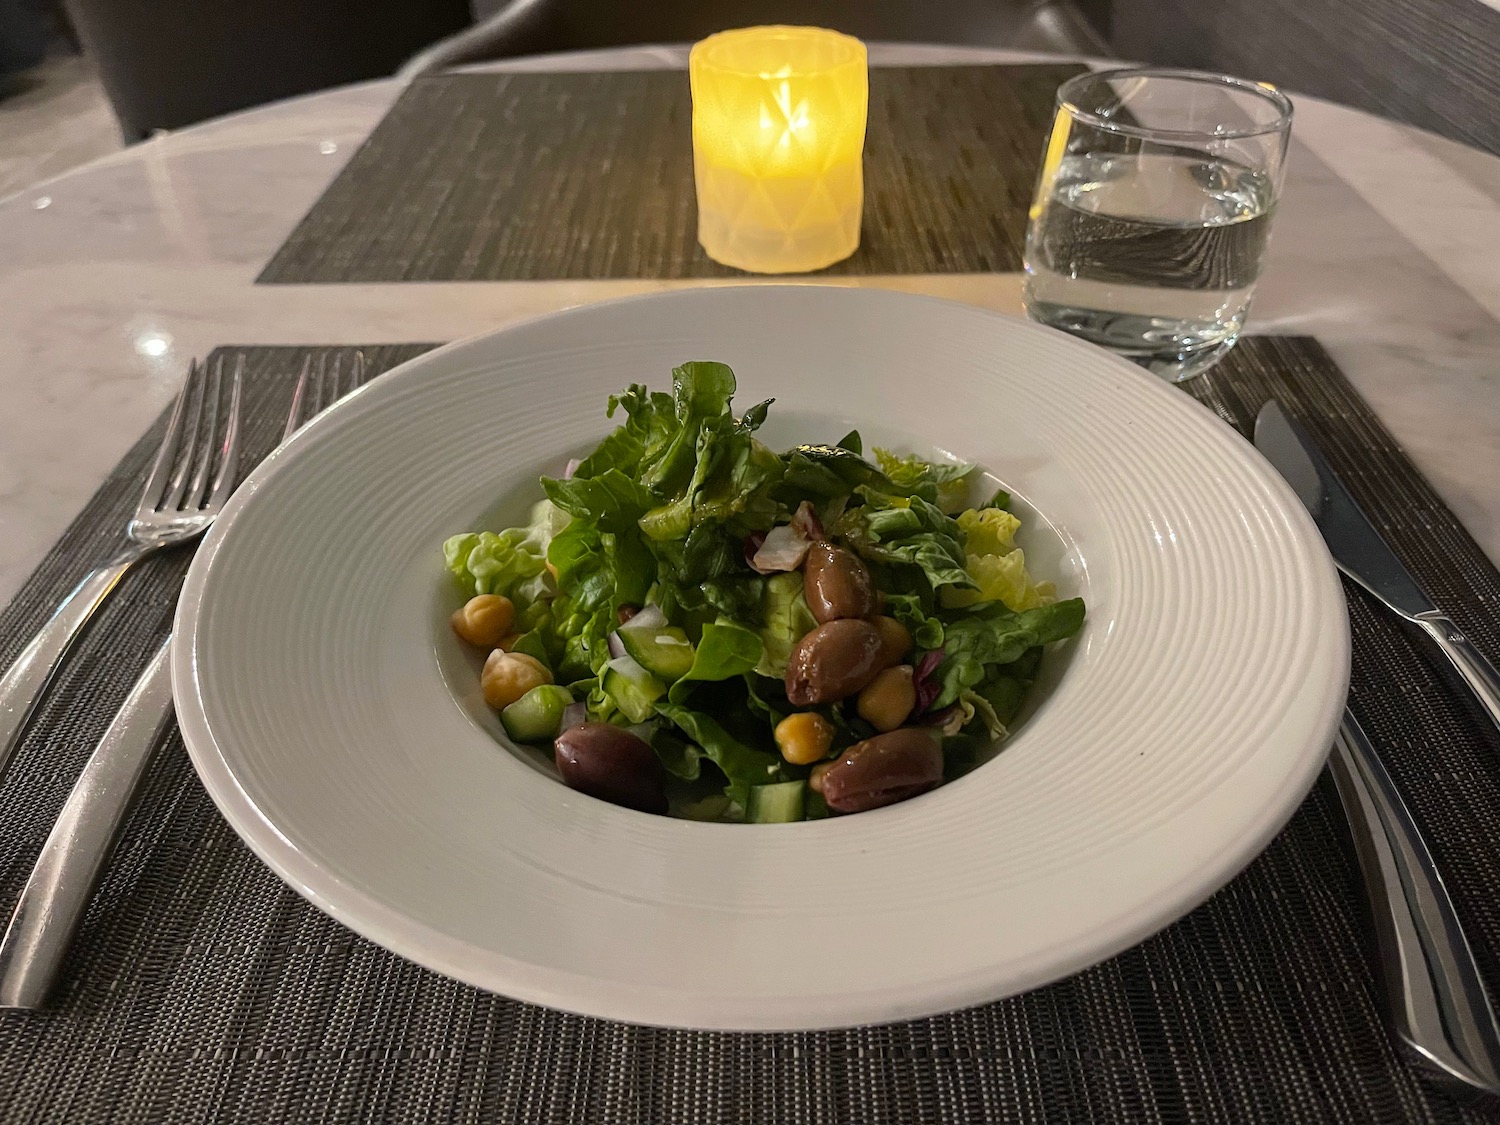 a plate of salad with a candle and a glass of water